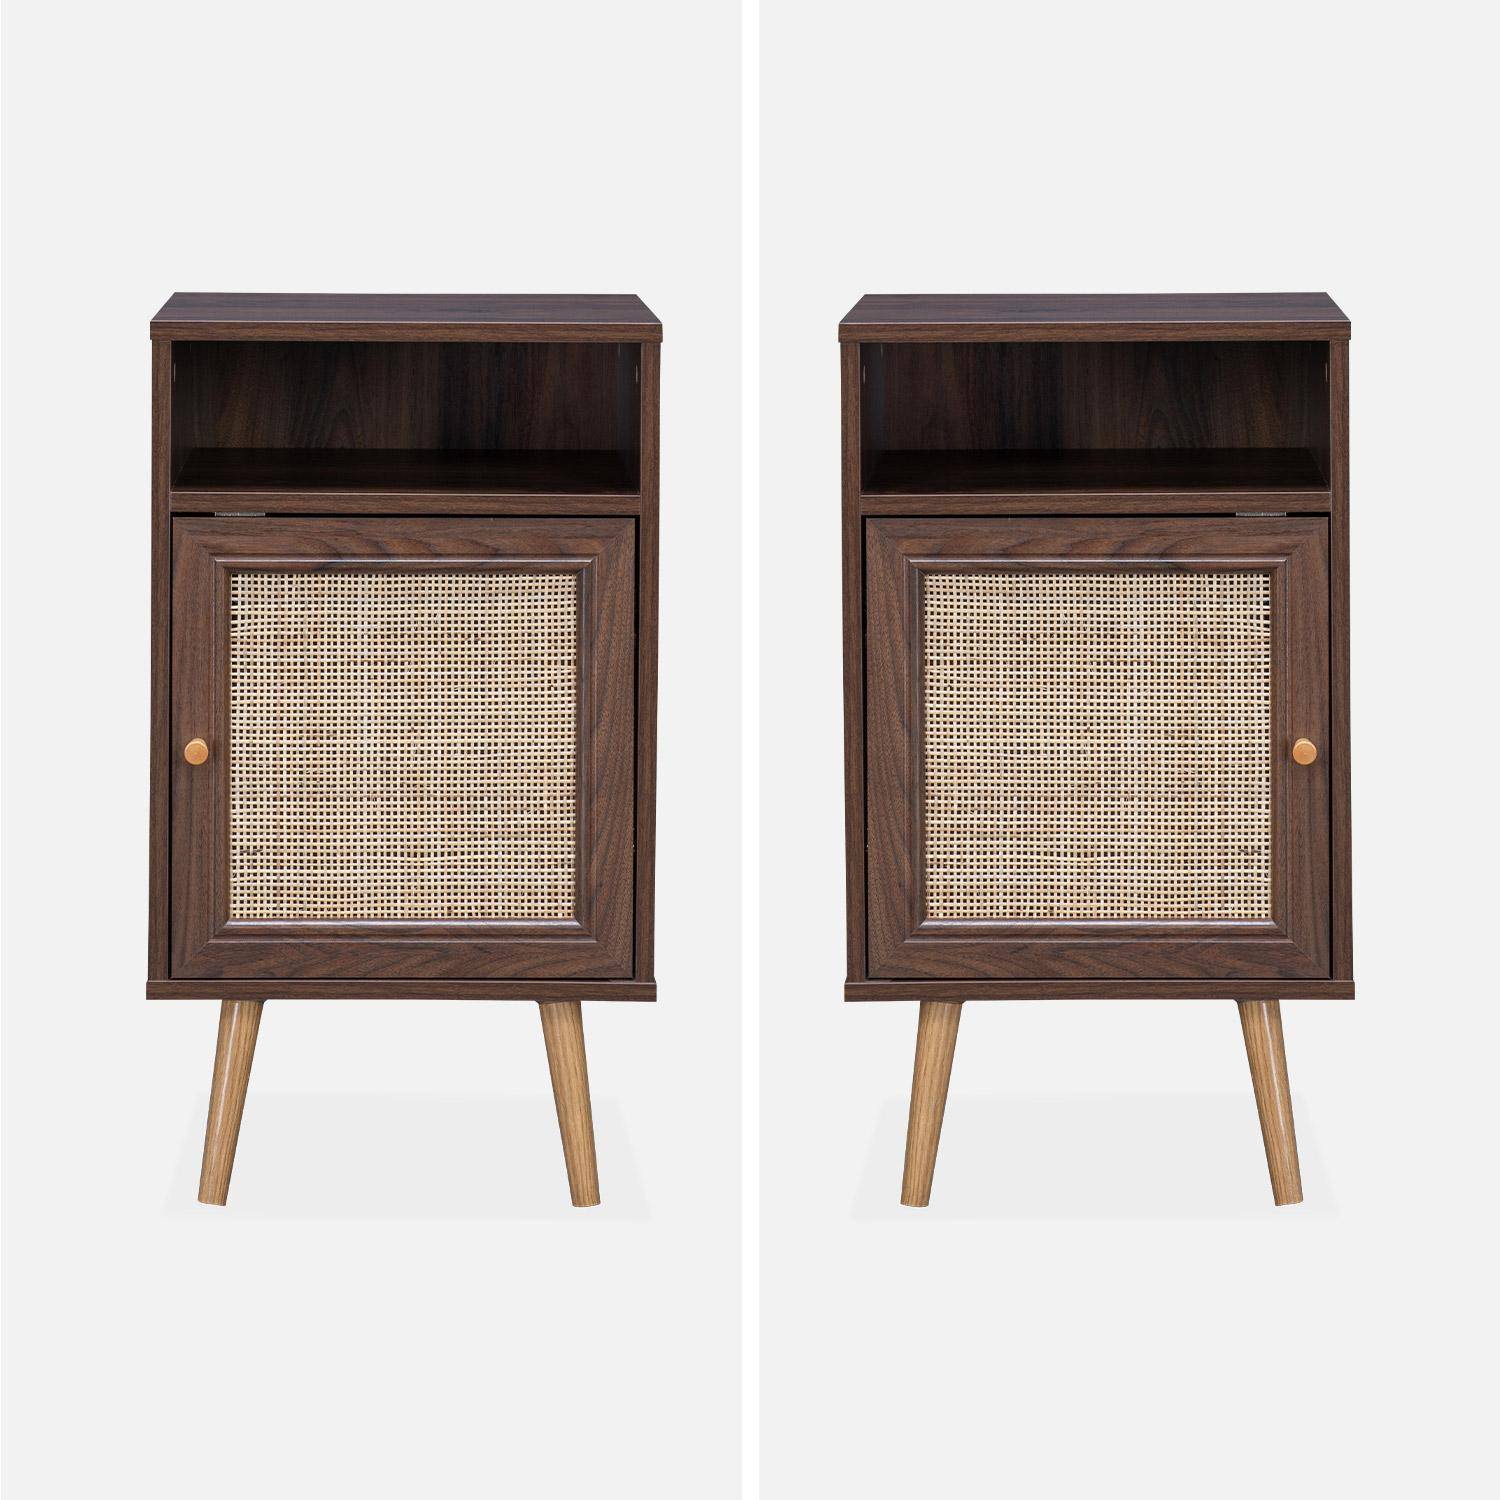 Pair of Scandi-style wood and cane rattan bedside tables with cupboard, 40x39x70cm - Boheme - Dark Wood colour Photo4